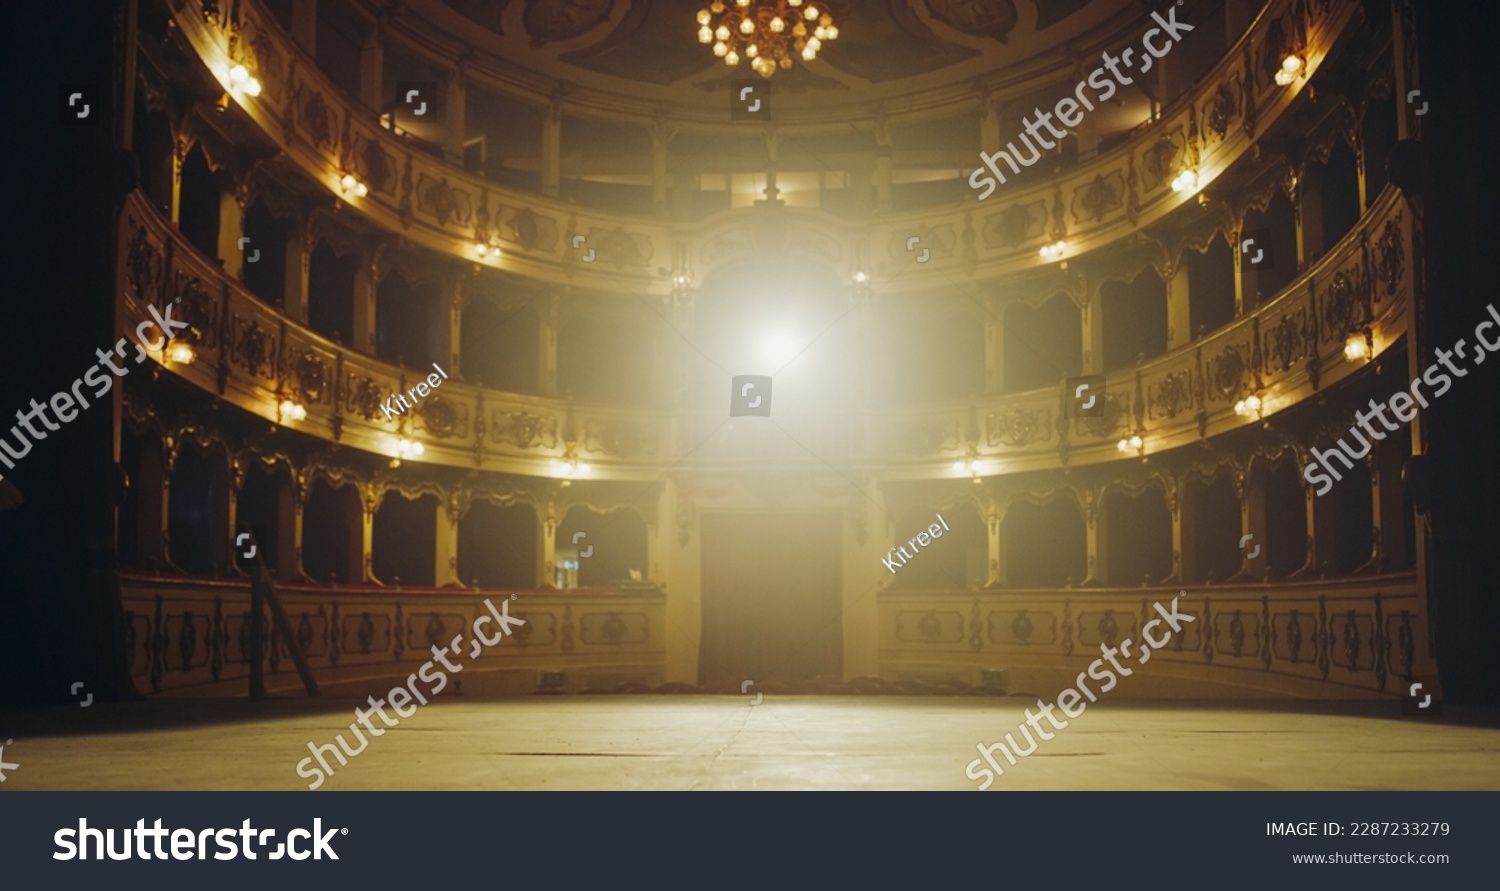 Wide shot of an Empty Elegant Classic Theatre with Spotlight Shot from the Stage. Well-lit Opera House with Beautiful Golden Decoration Ready to Recieve Audience for a Play or Ballet Show #2287233279